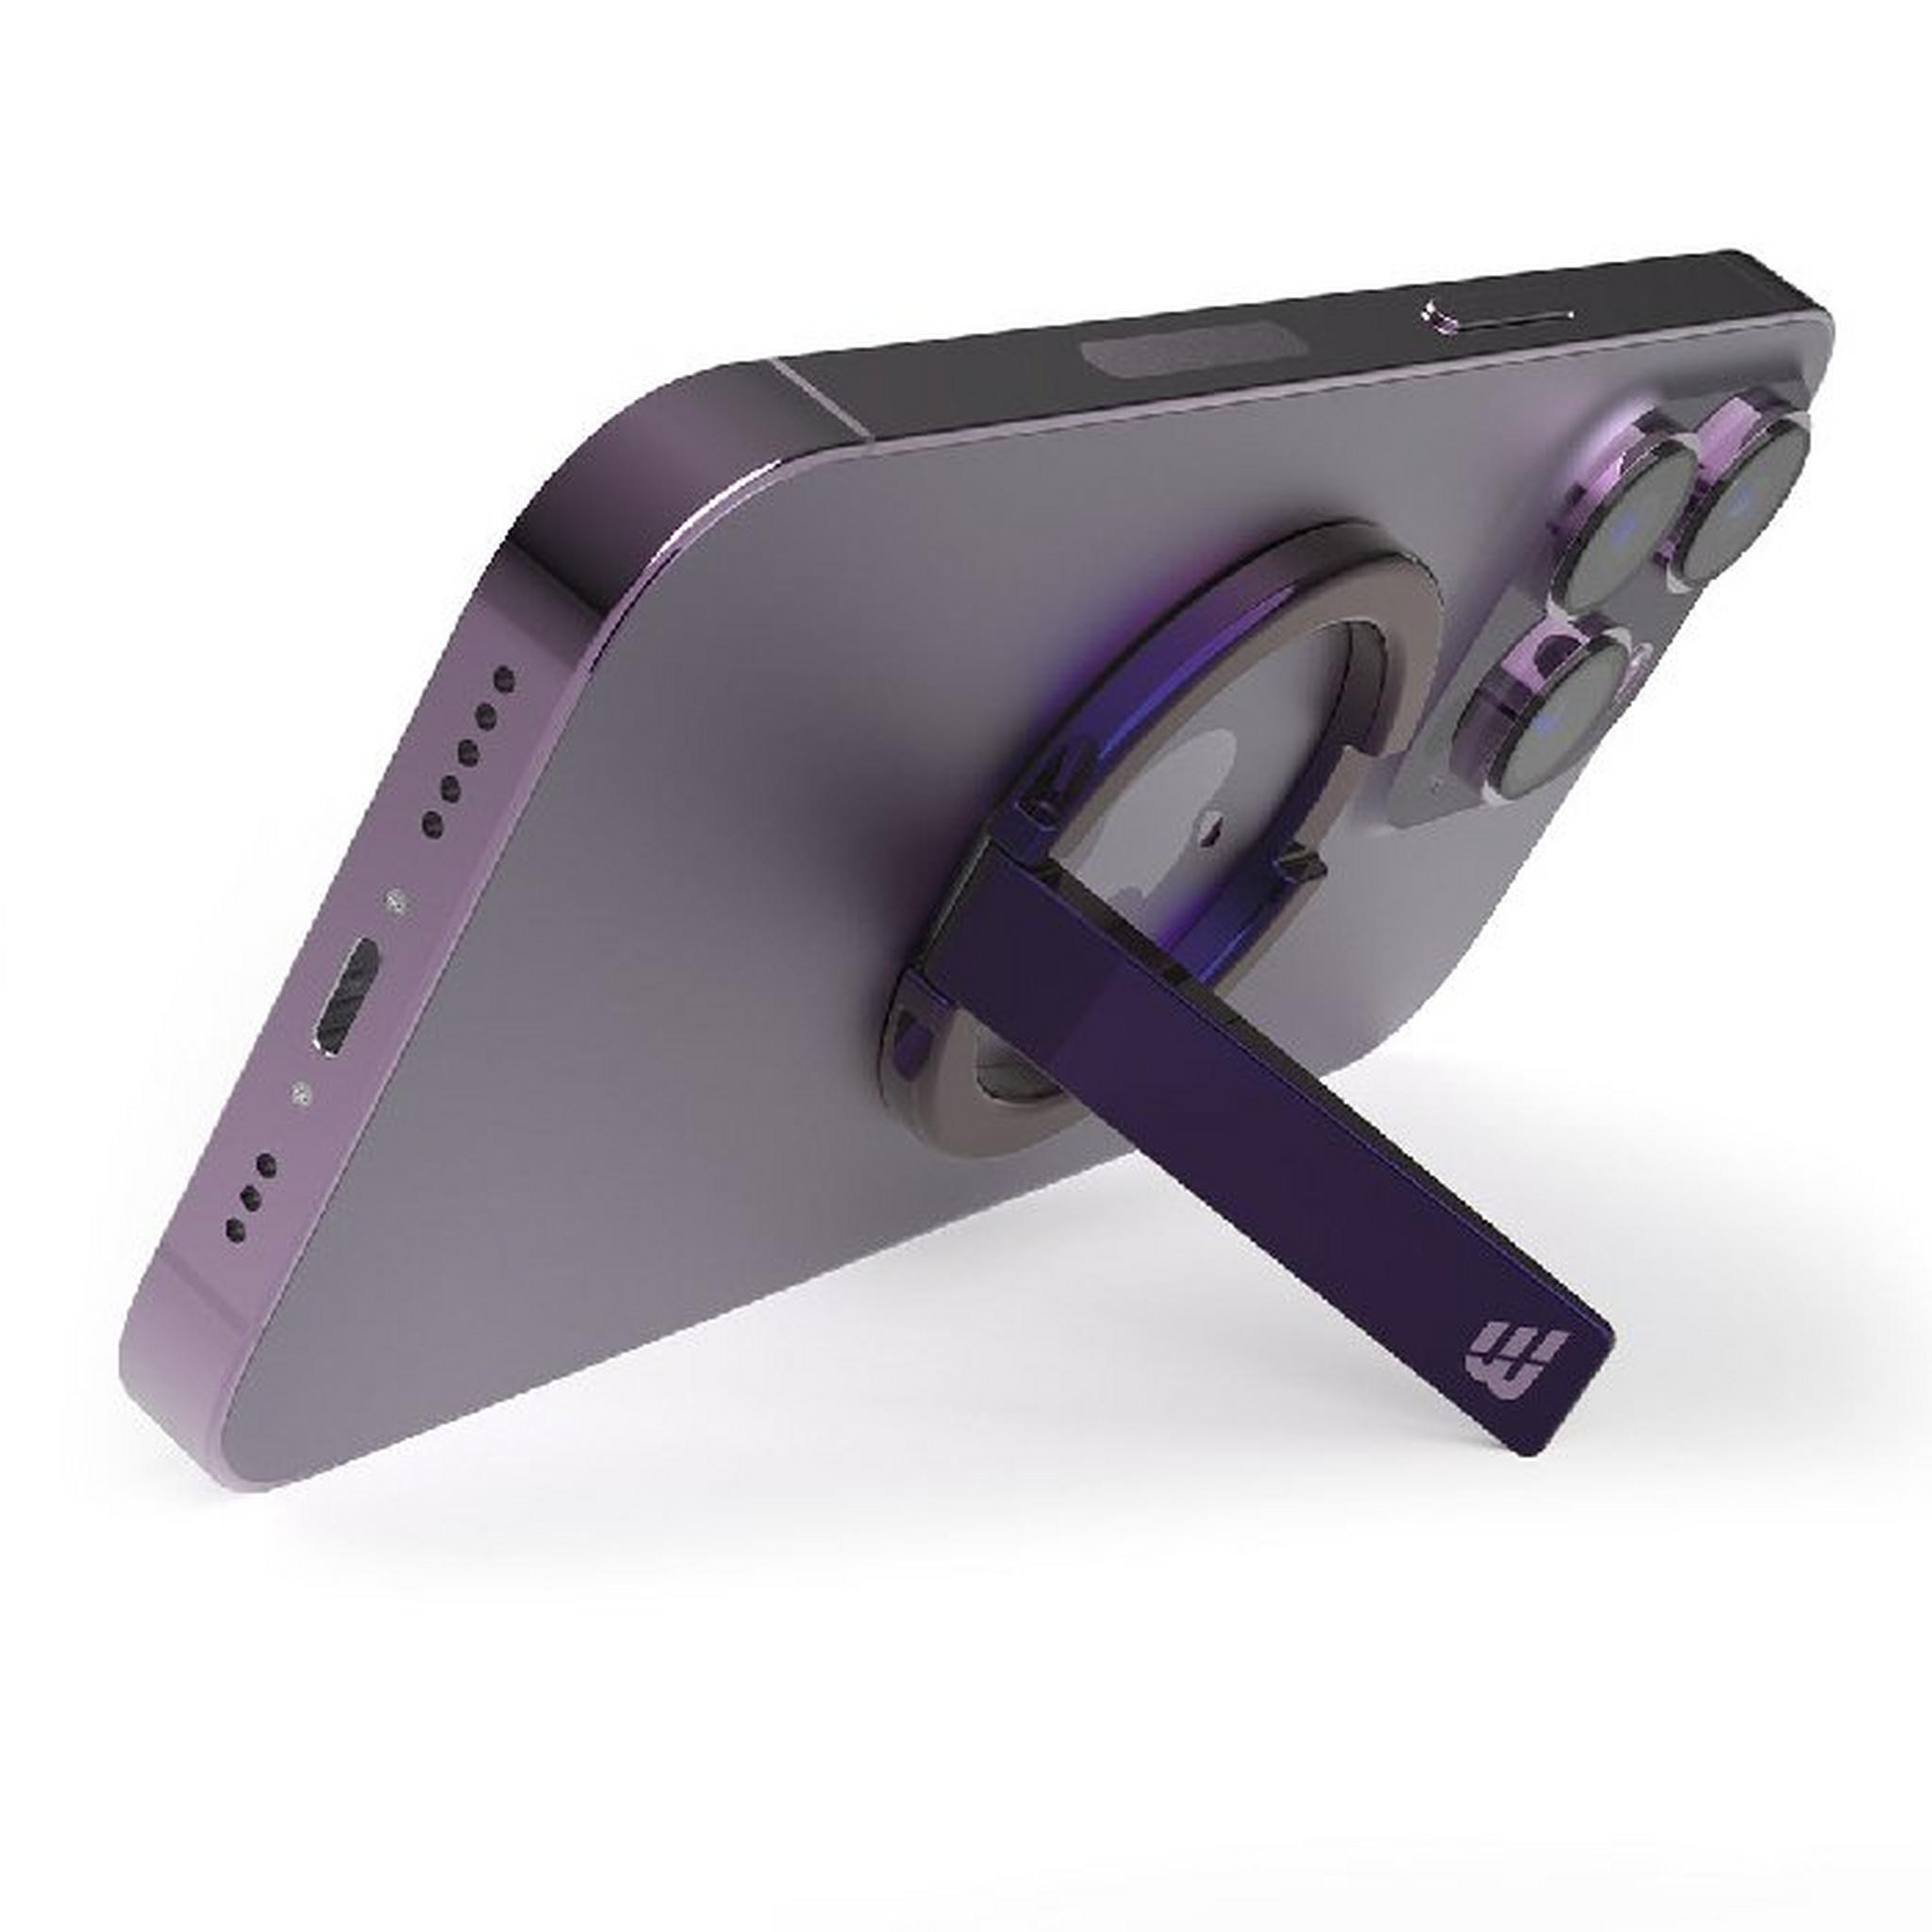 Baykron Compact Magnetic Stand for Mobiles, BKR-MAGST-DP - Purple